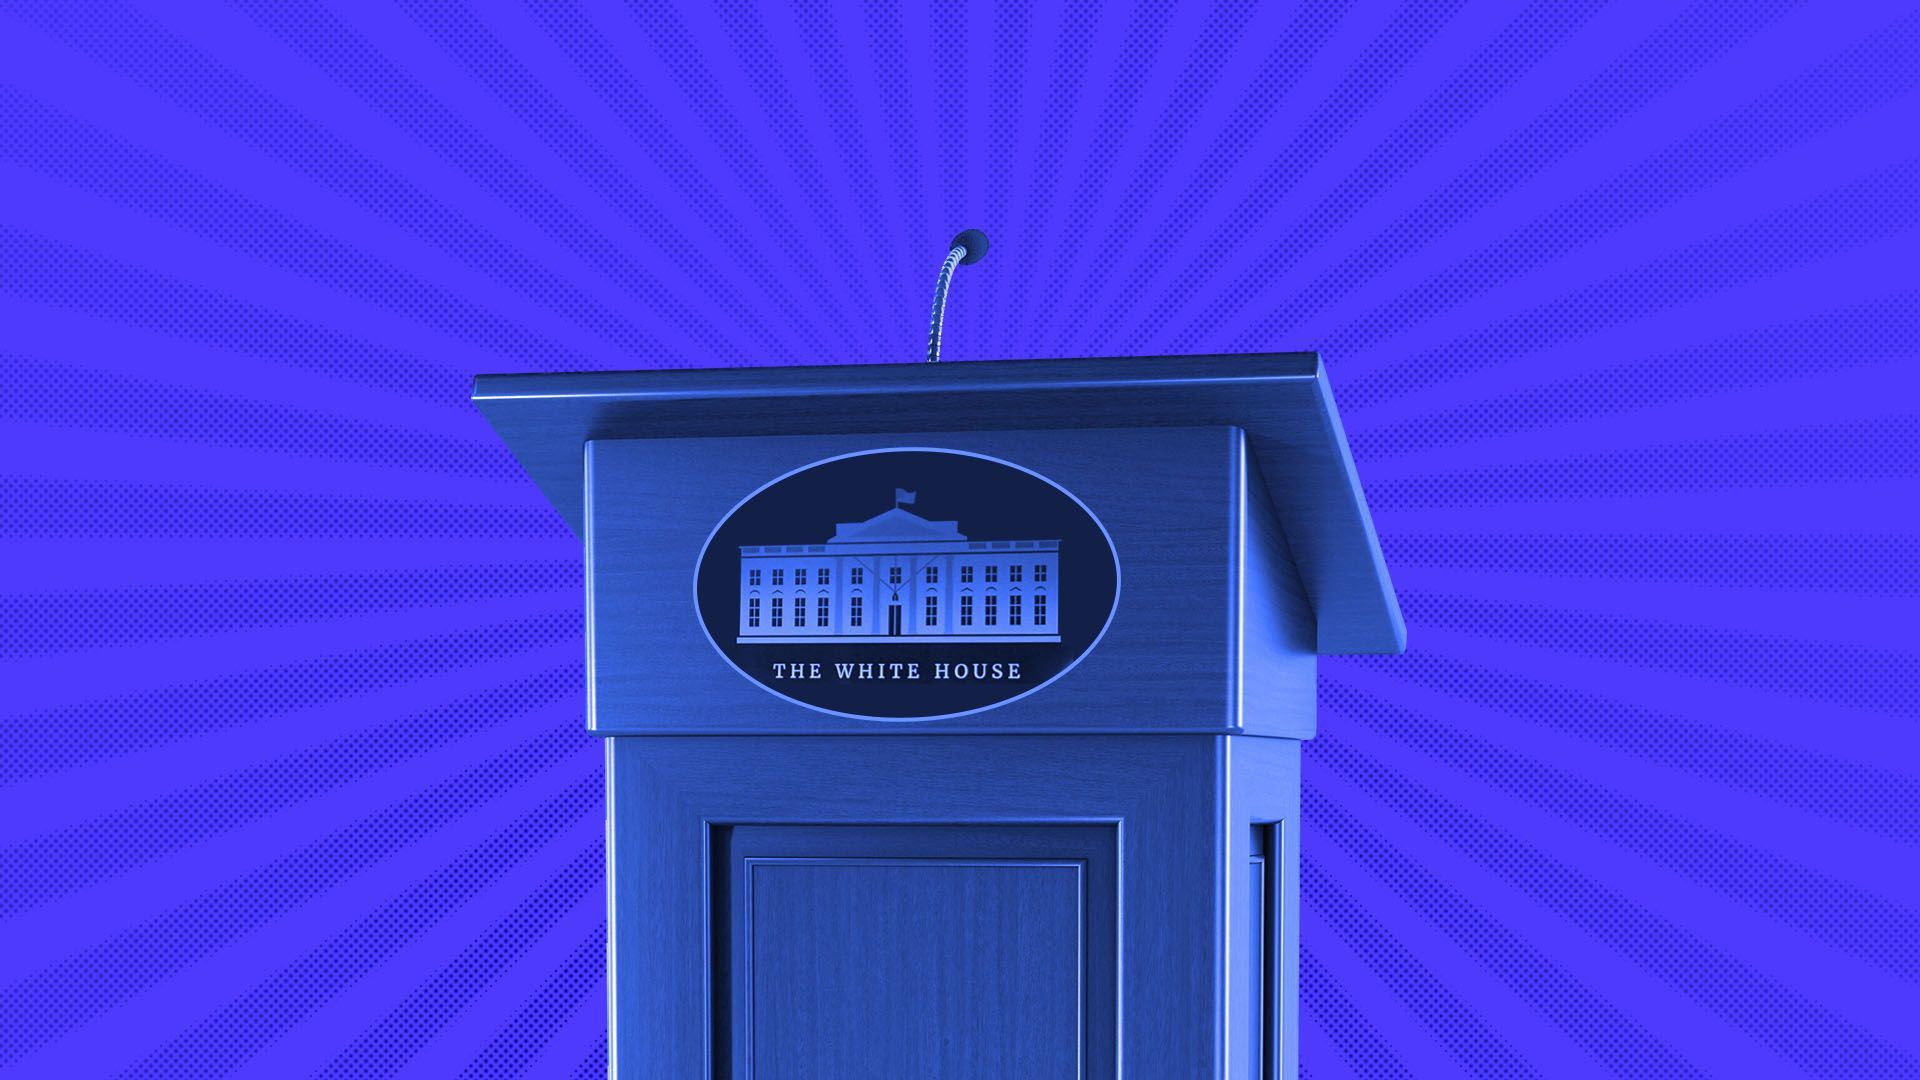 Illustration of a podium with the white house seal on it